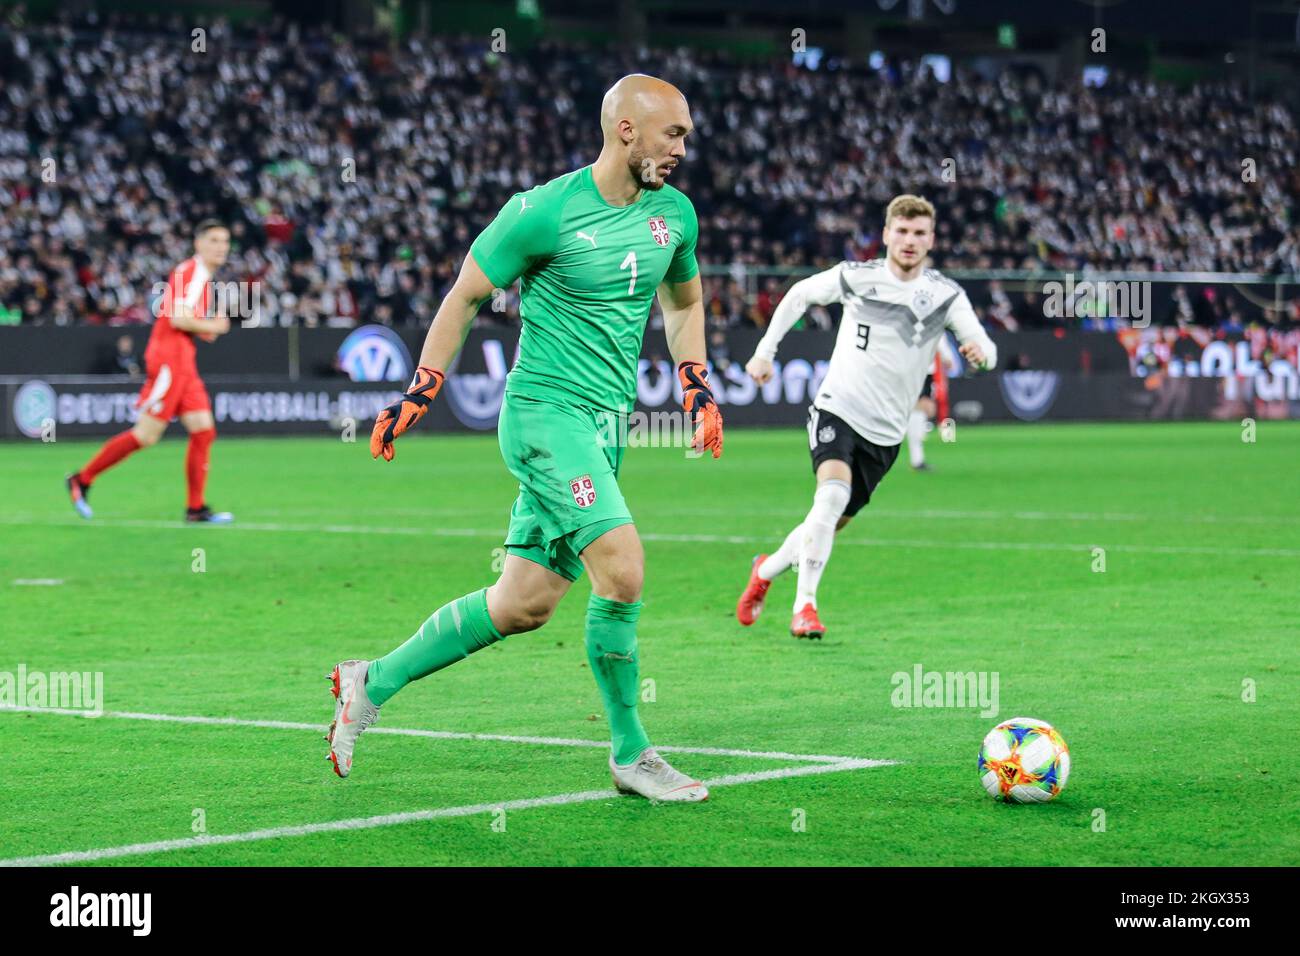 Wolfsburg, Germany, March 20, 2019: Serbia national team goalkeeper Marko Dmitrovic in action during the international friendly game between Germany Stock Photo